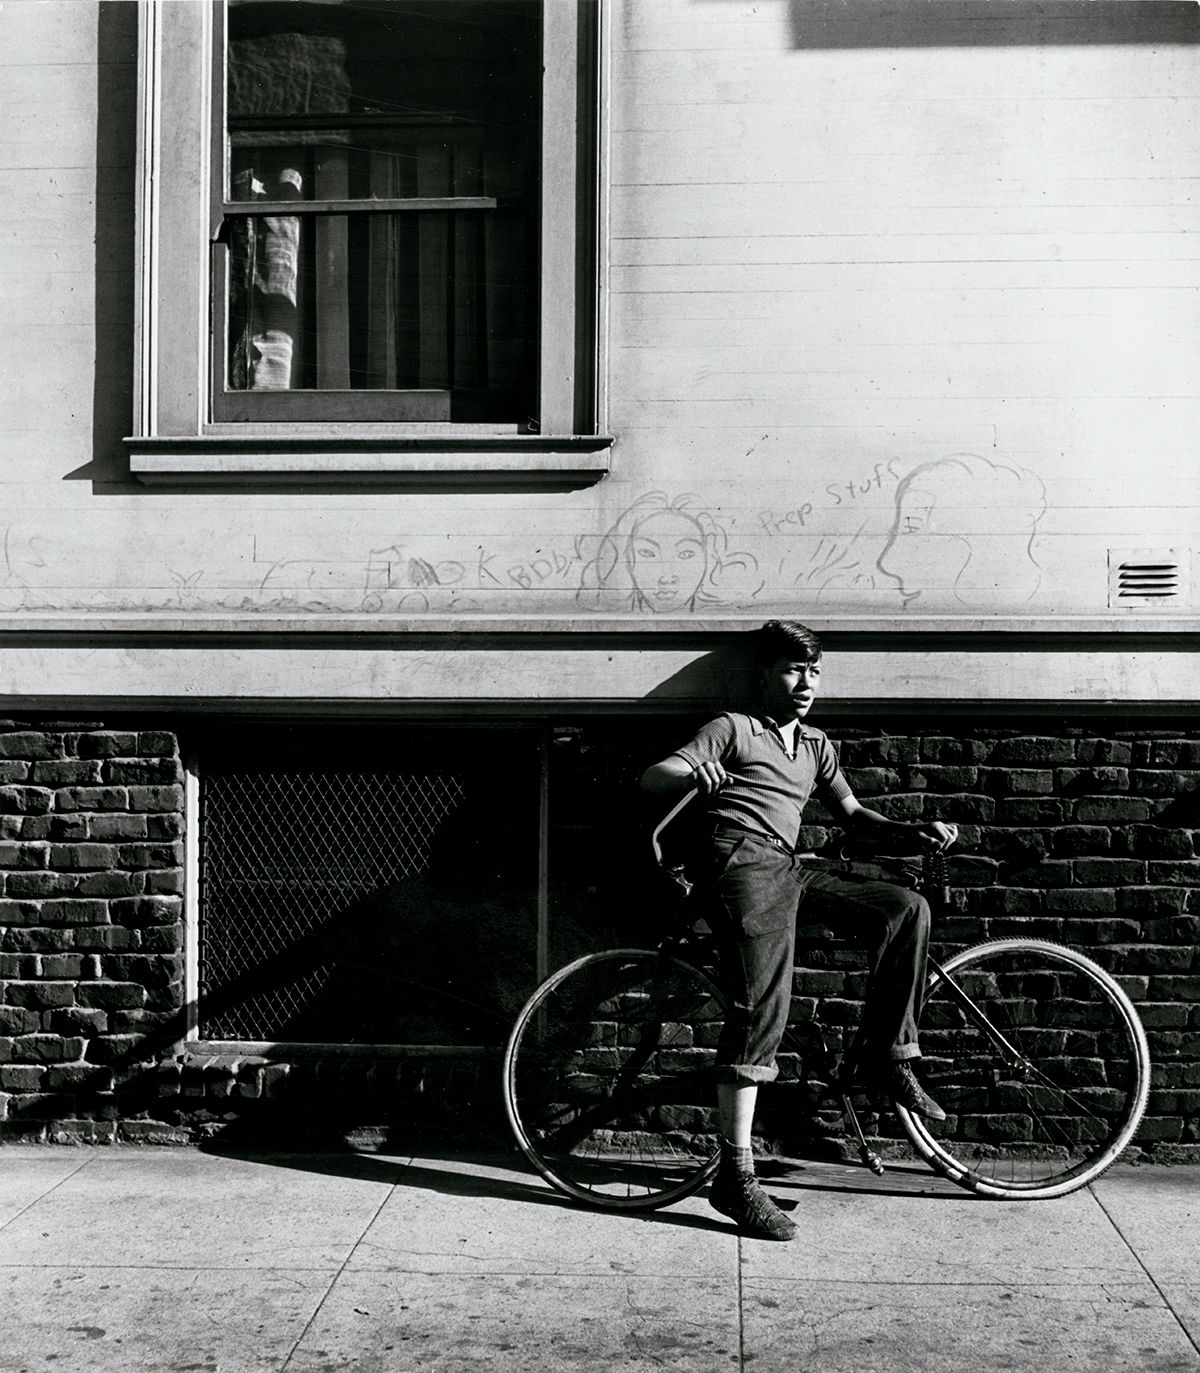 Street boy with bicycle and graffiti